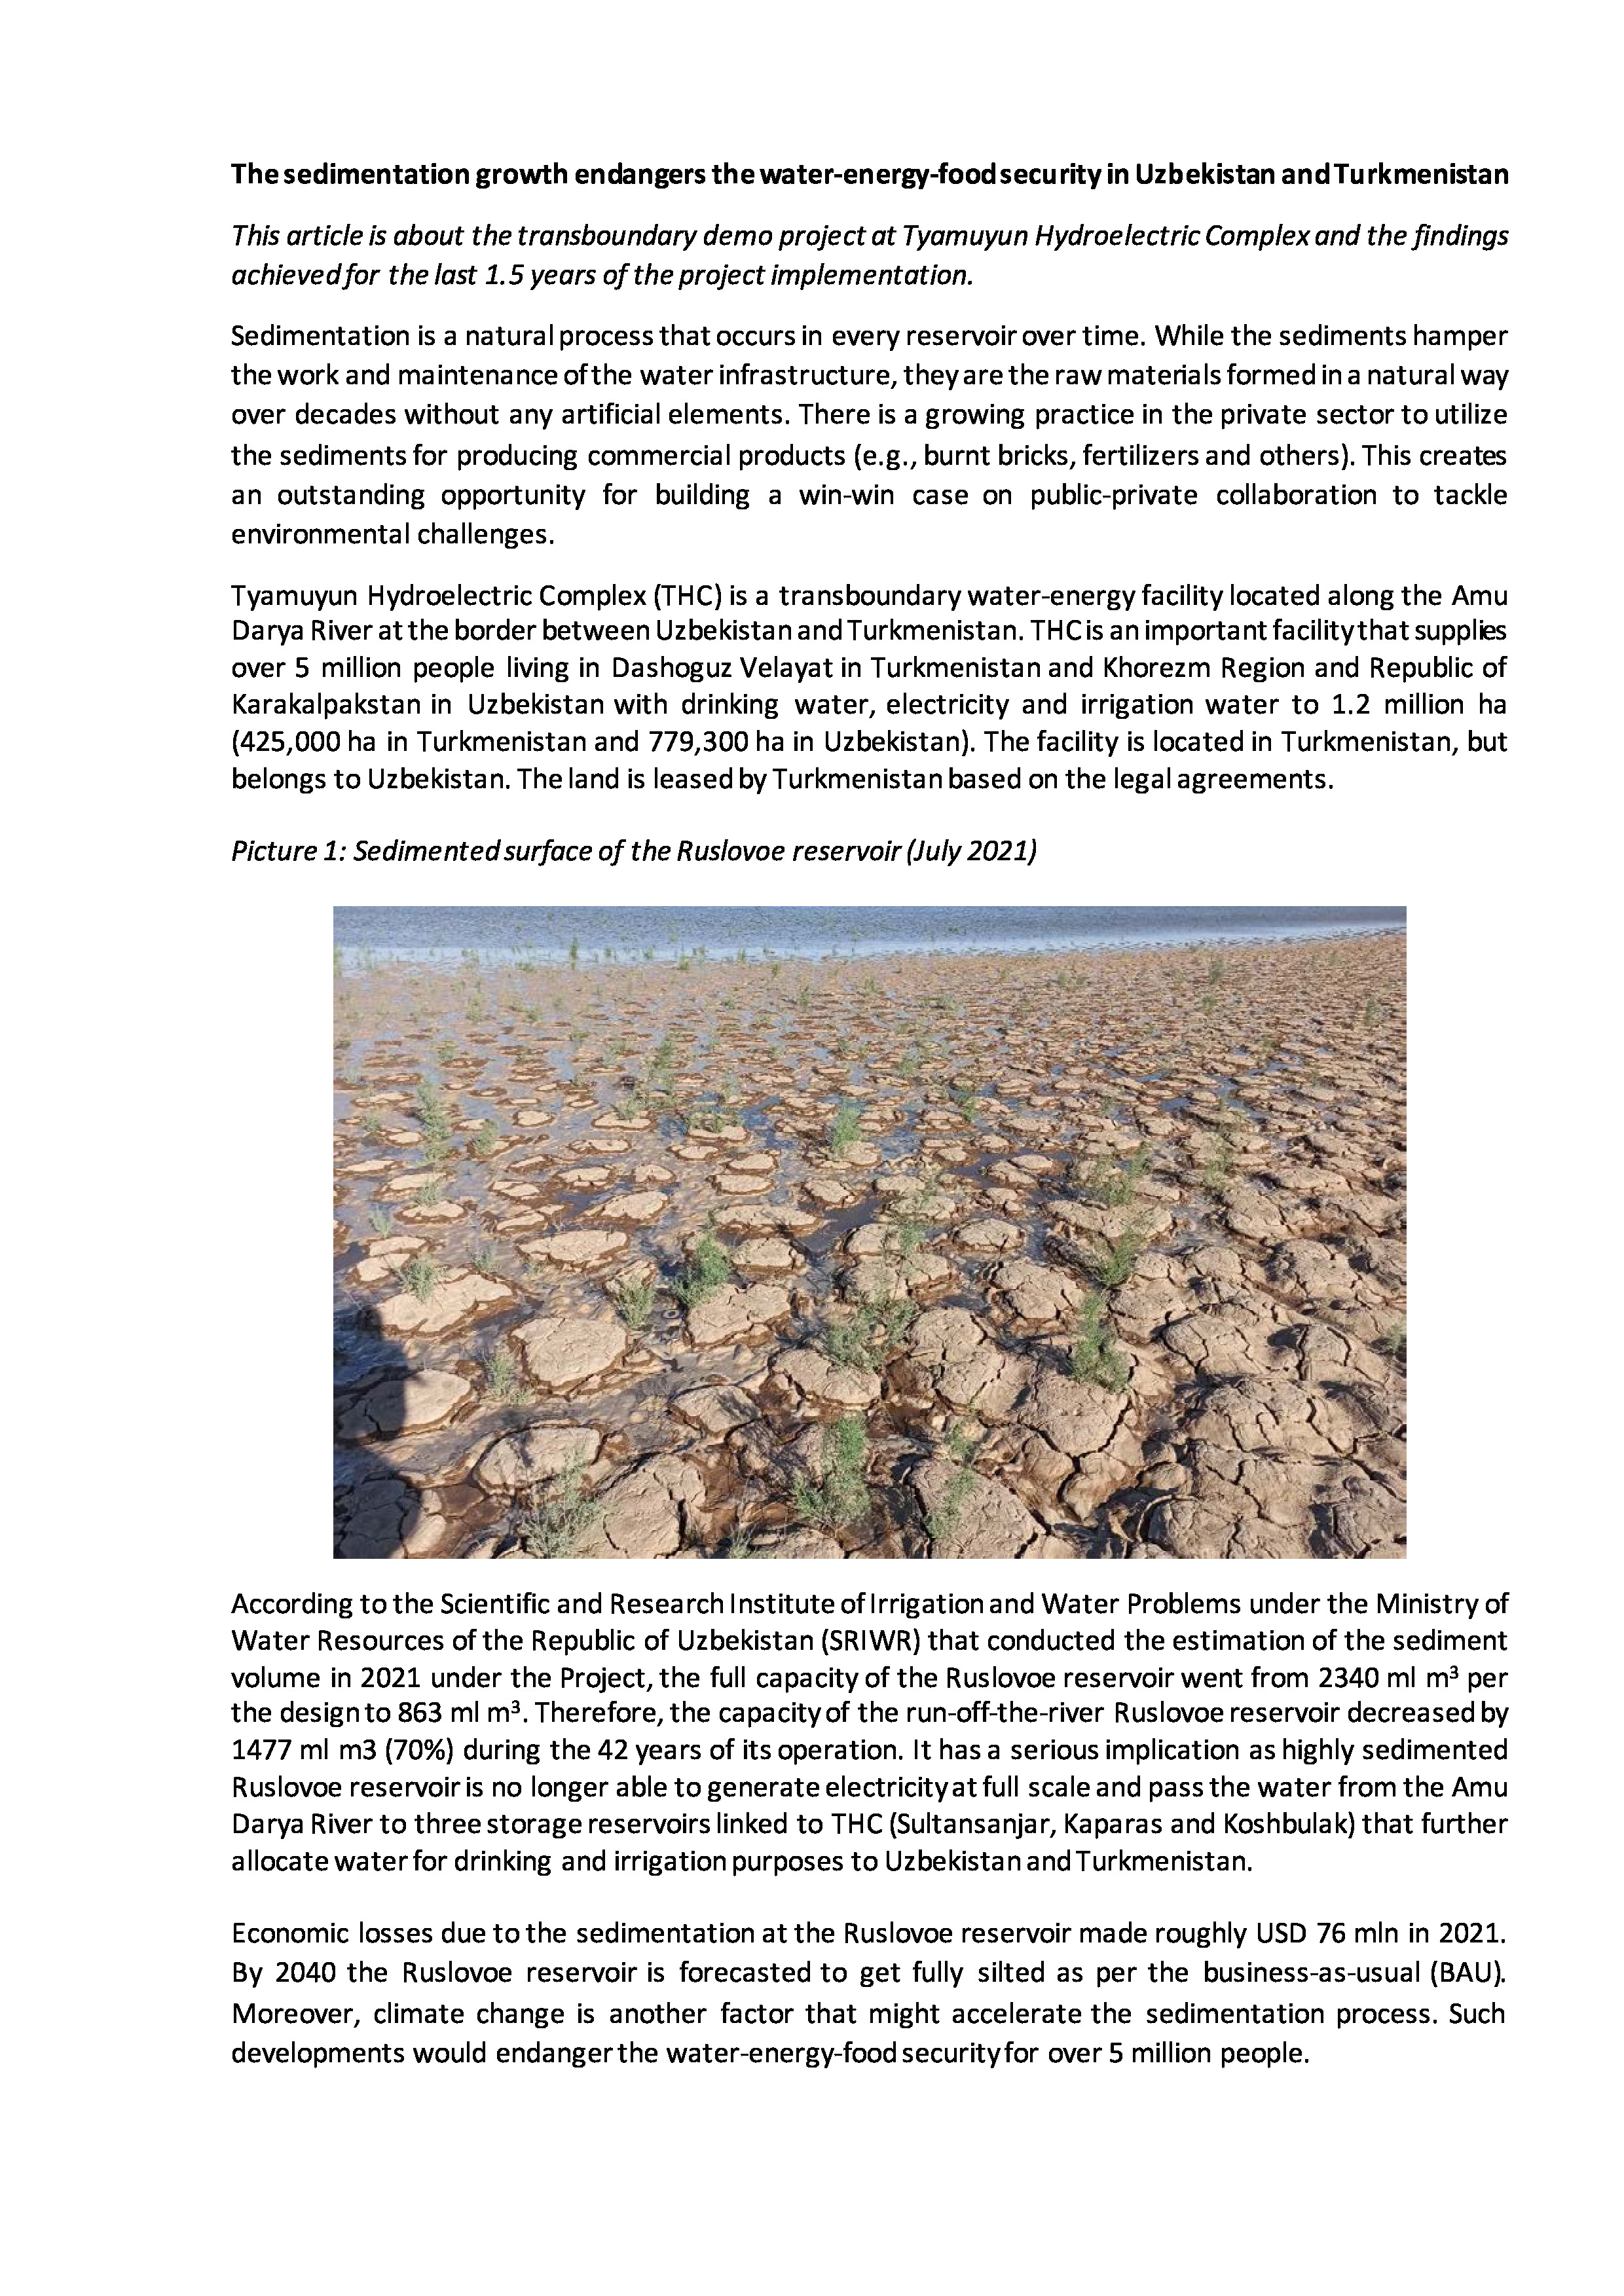 Article: The sedimentation growth endangers the water-energy-food security in Uzbekistan and Turkmenistan, 2022 | A.Kushanova